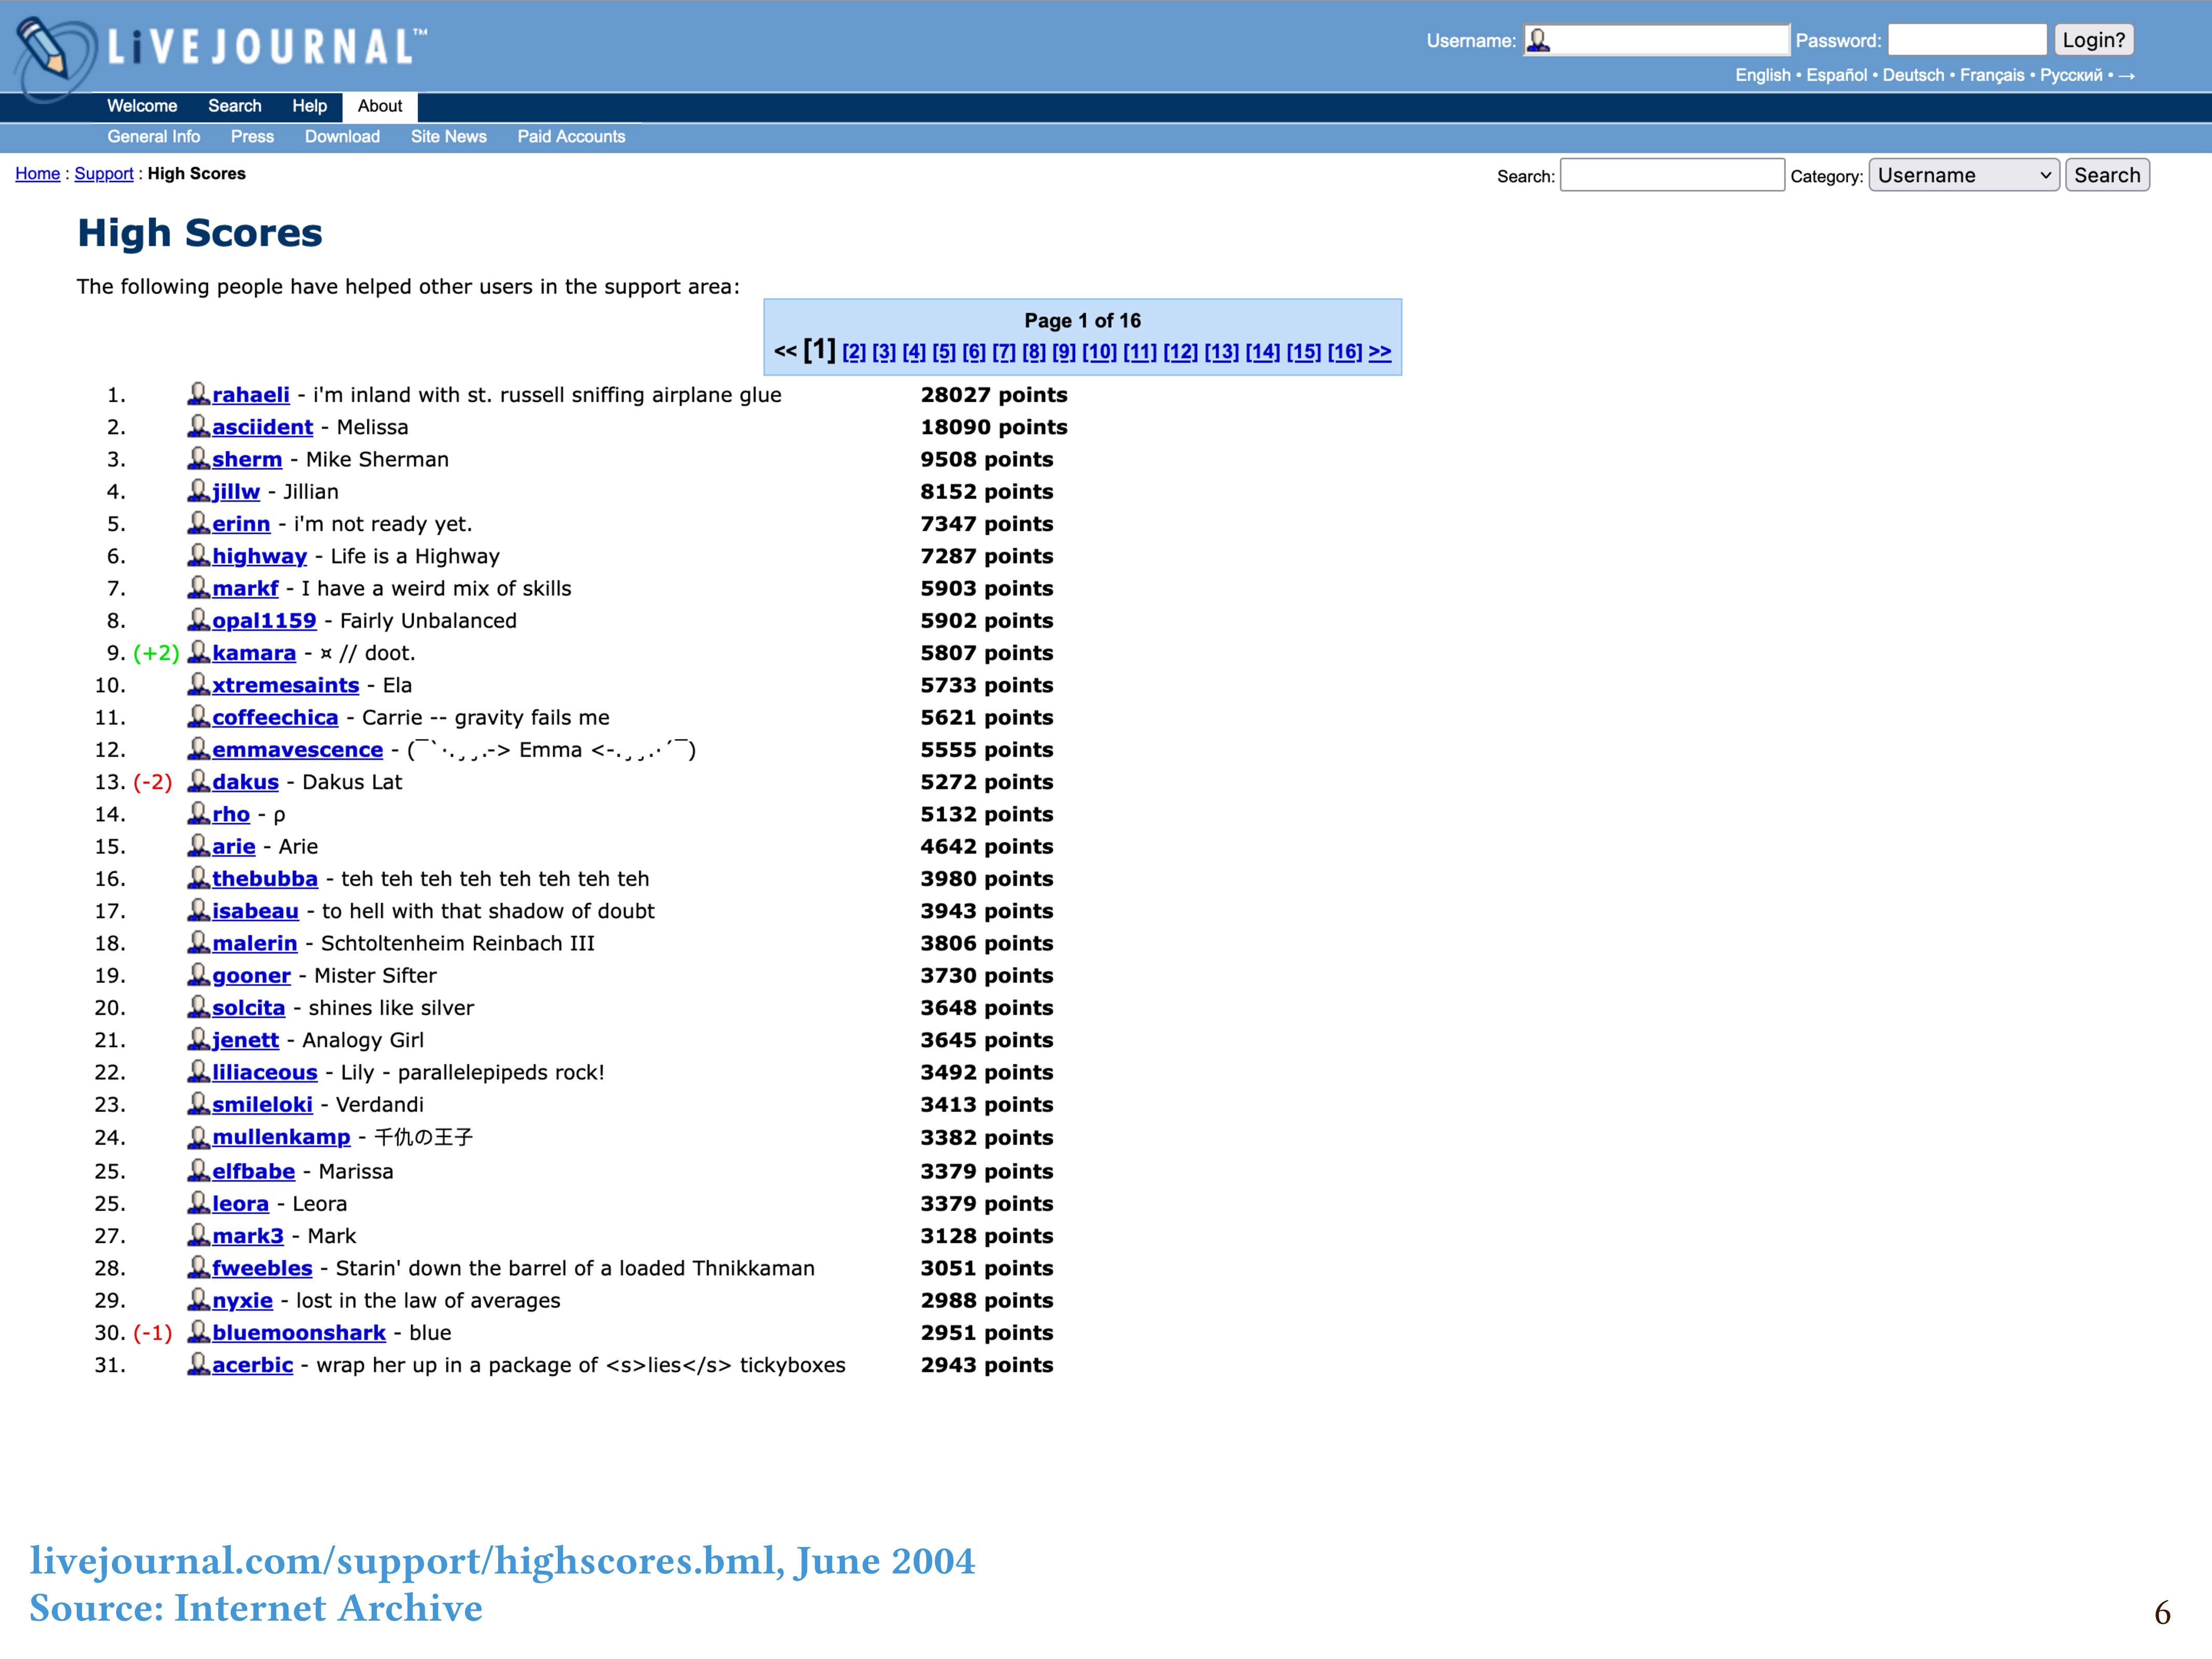 A screenshot of the LiveJournal support high scores page, as archived by the Internet Archive in June 2004.  A couple people have tens of thousands of points, followed by a long tail of volunteers with fewer points.